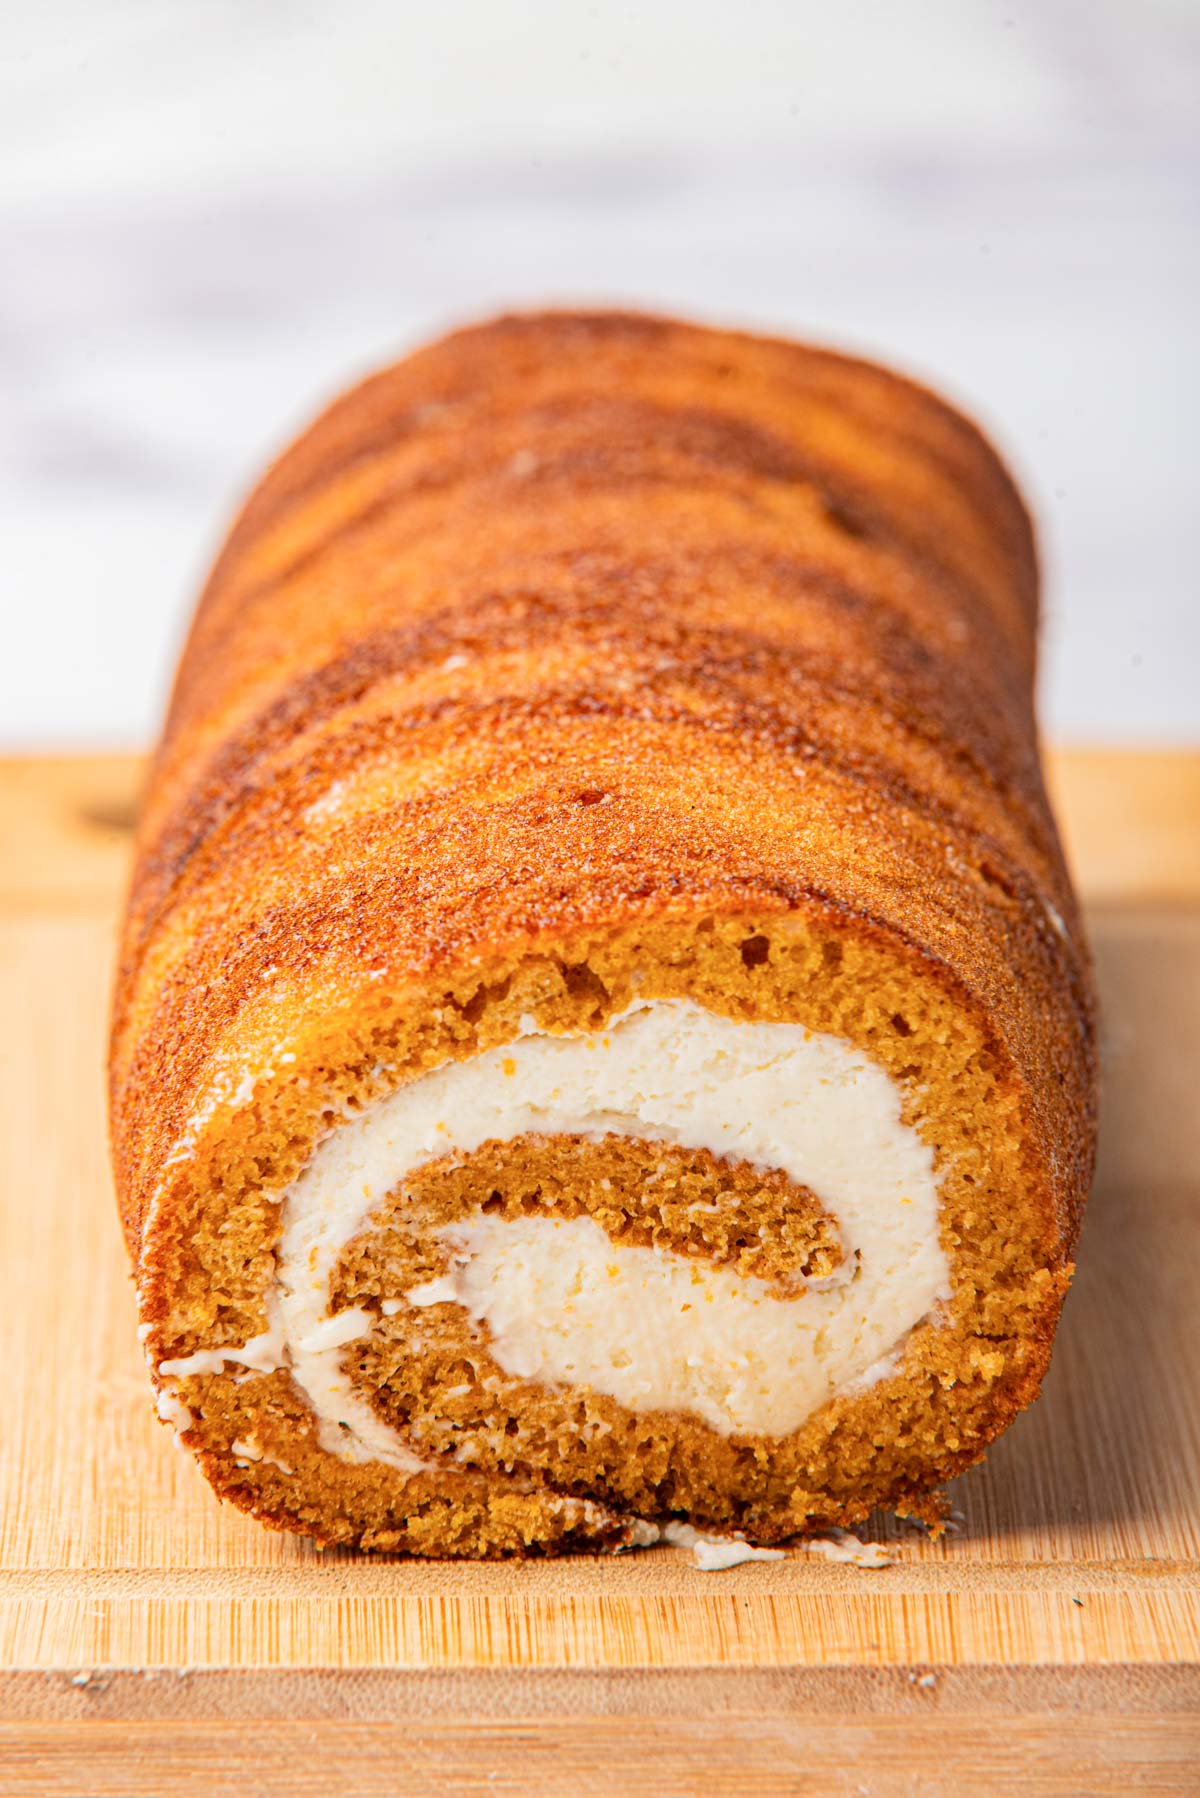 Pumpkin cake with cream cheese filling, showcasing the spiral pattern, placed on a wooden cutting board.